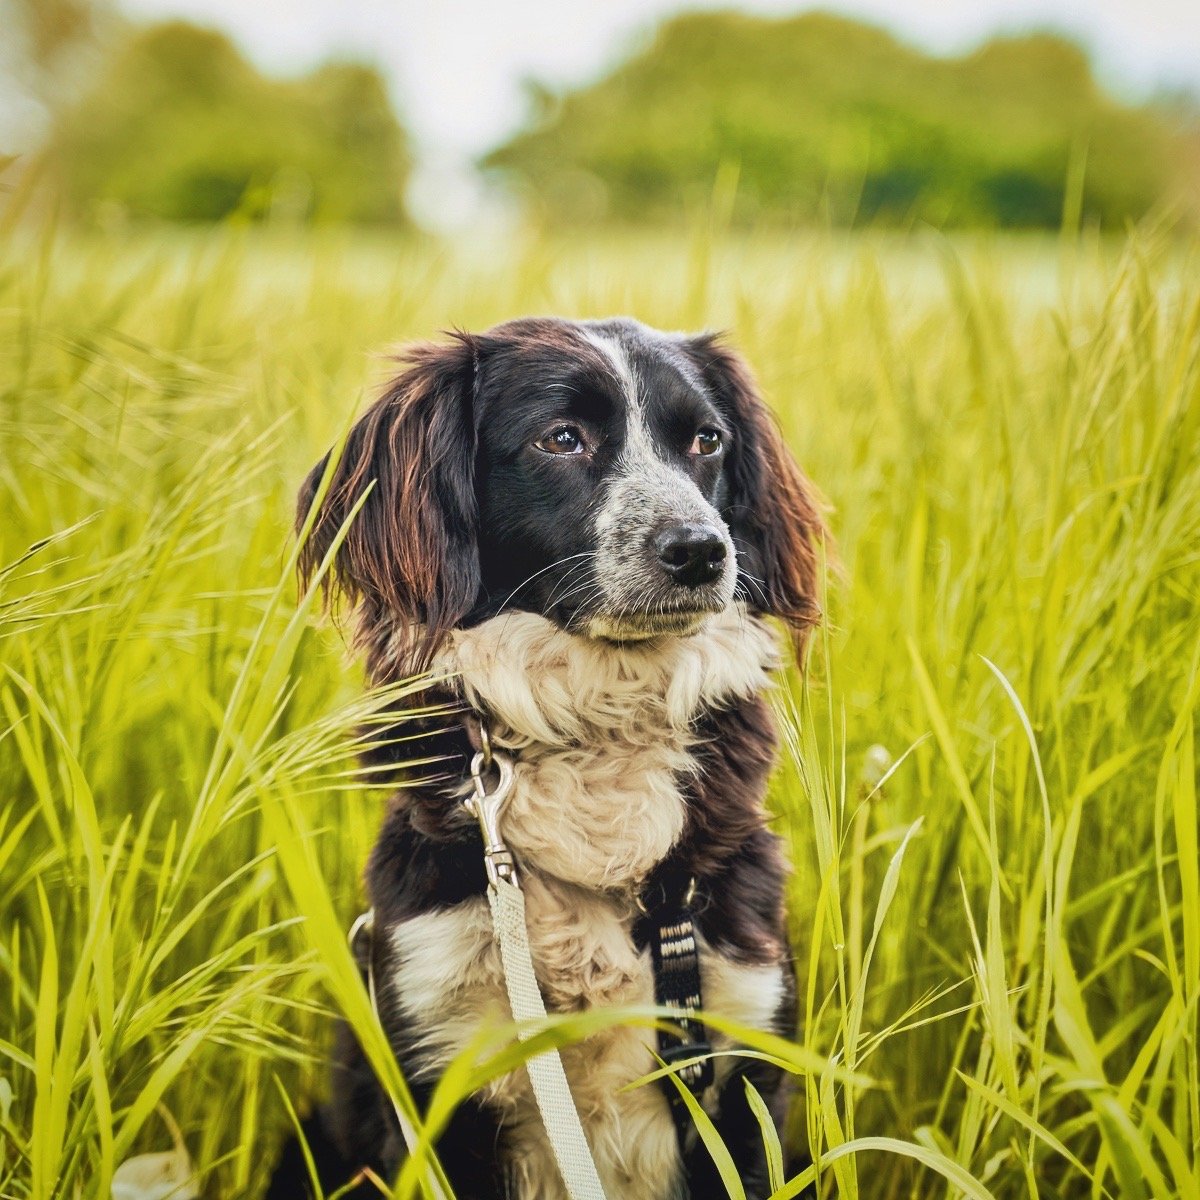 Does your dog eat grass?

Having a munch on grass is a completely normal behaviour that most dogs seem to enjoy. A recent survey of 1500 dogs found that nearly 70% consumed grass on a regular basis. 

There are 3 main reasons for eating grass:
🤮 To 